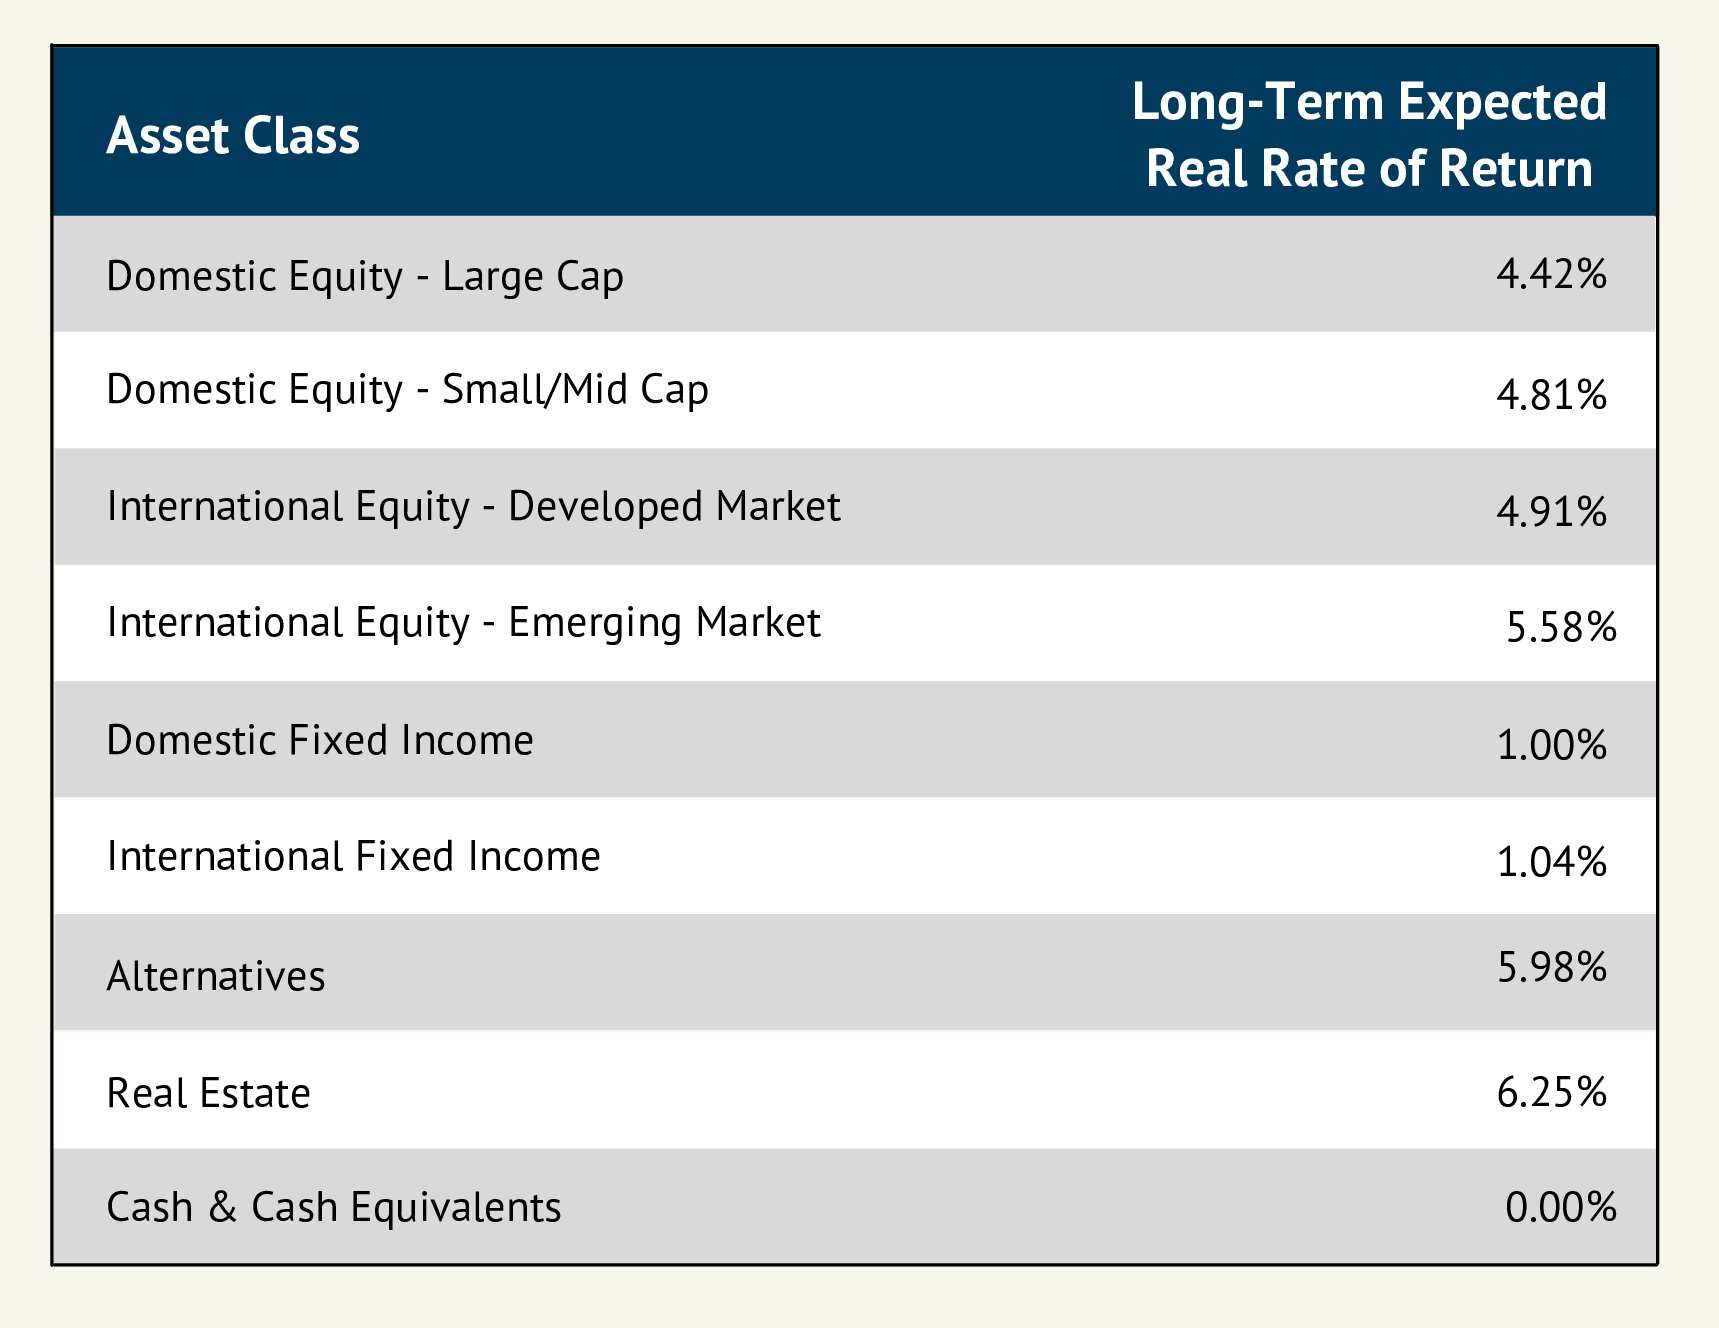 Calculation to determine the excess expected return over inflation for each asset class.